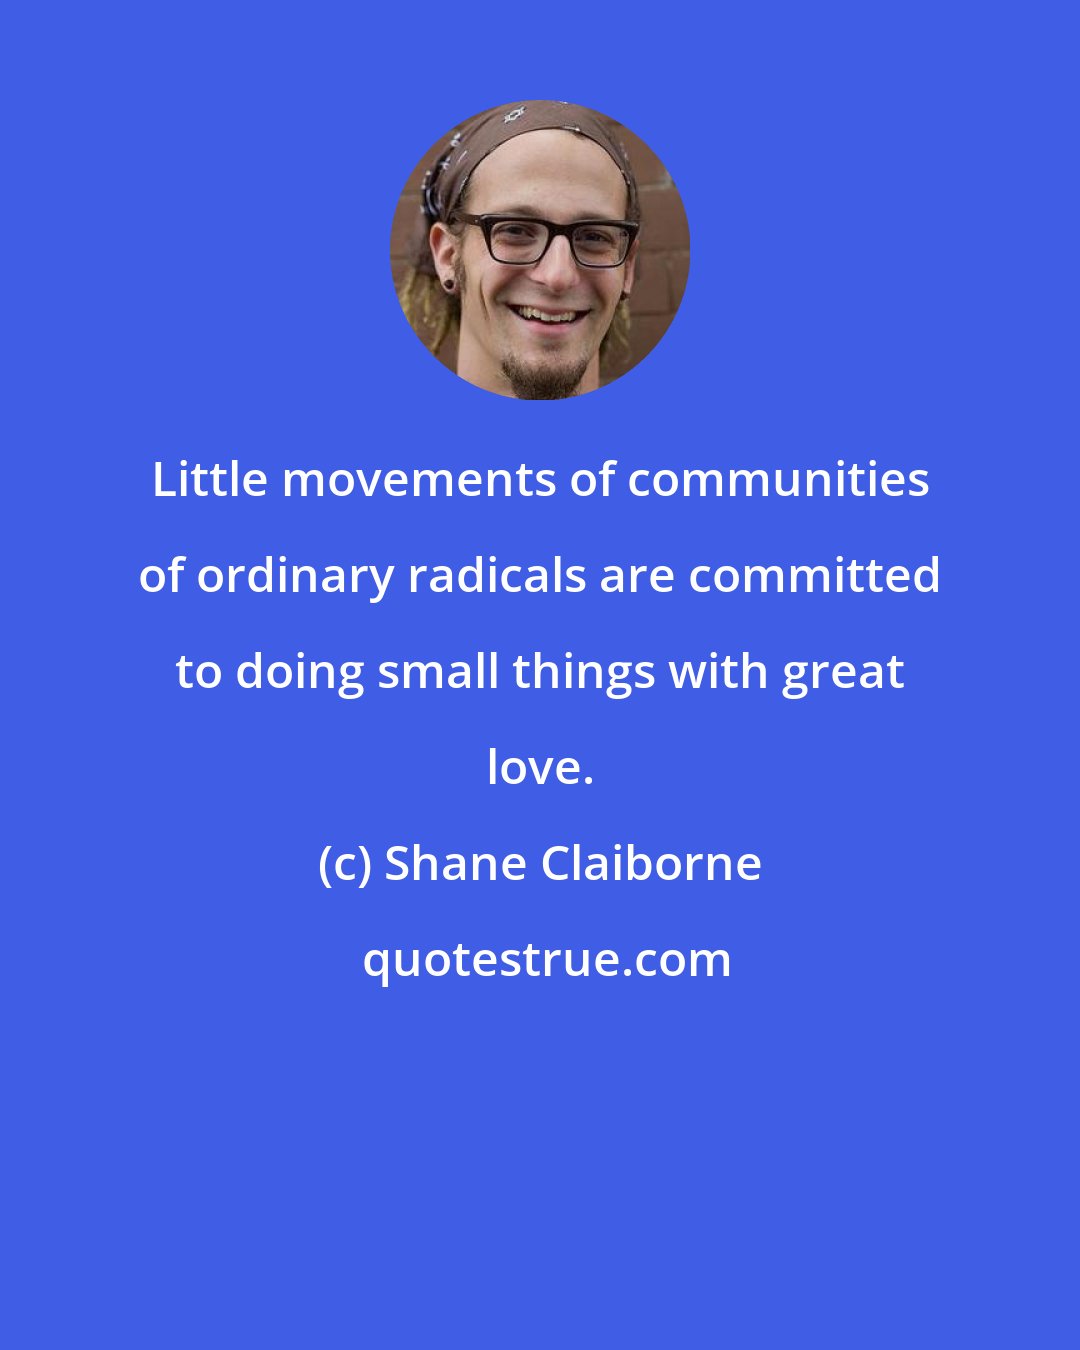 Shane Claiborne: Little movements of communities of ordinary radicals are committed to doing small things with great love.